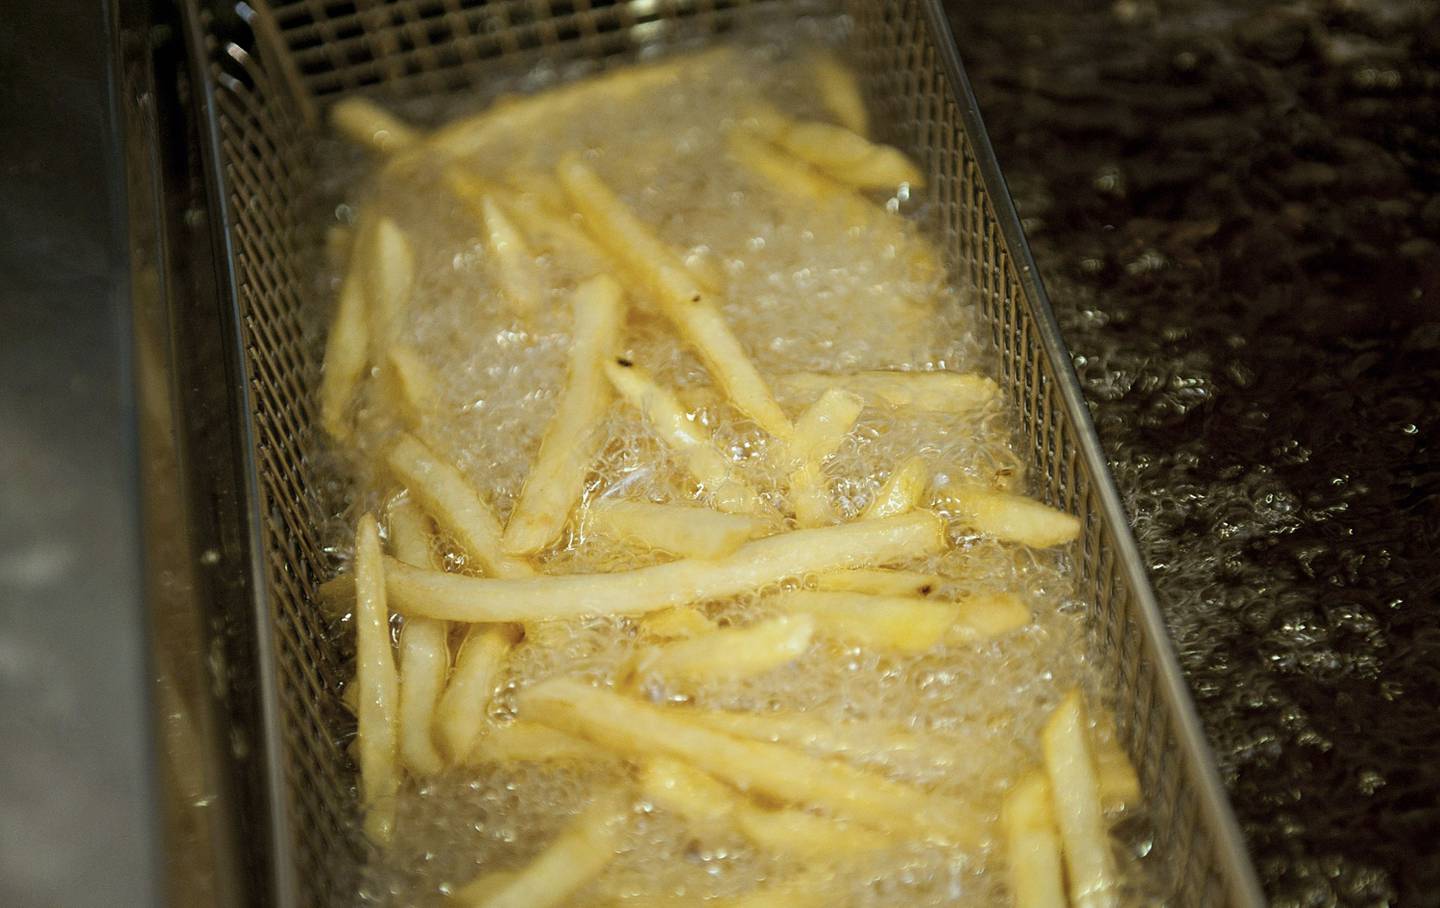 French fries are cooked during a quality evaluation at McDonald's Corp. headquarters in Oak Brook, Illinois, U.S.